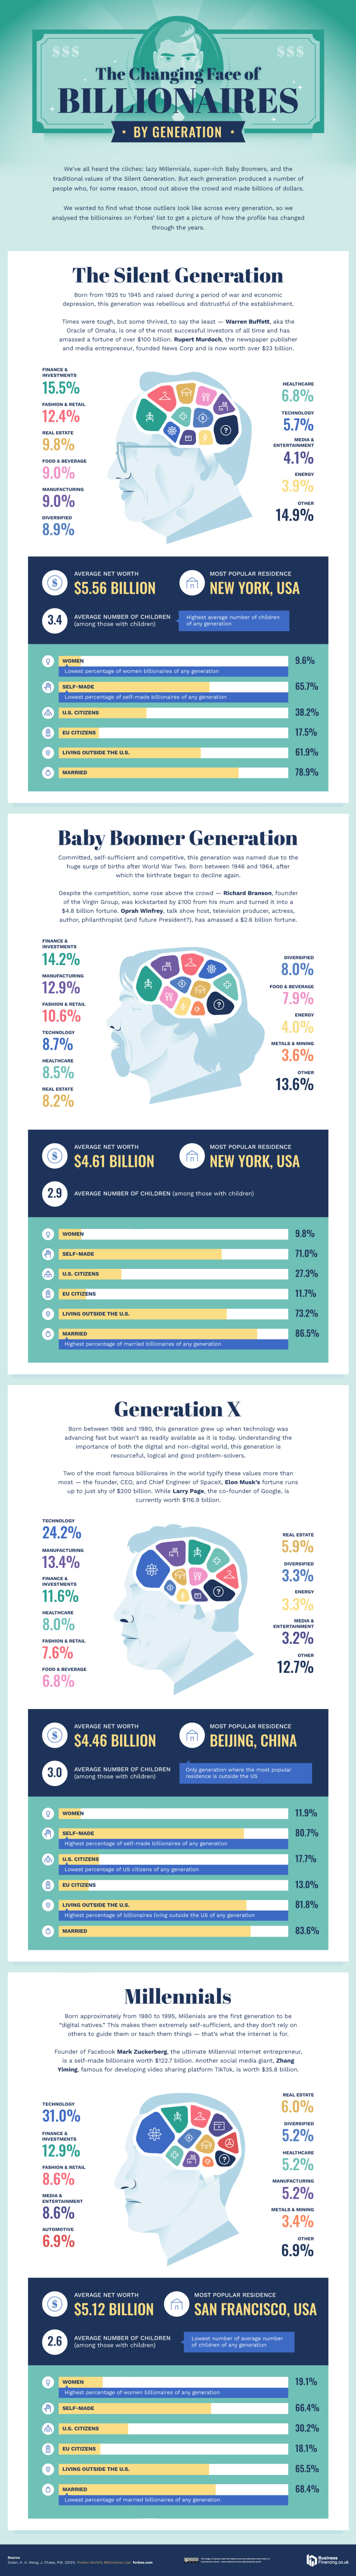 An infographic showing the changing face of a billionaire by generation.